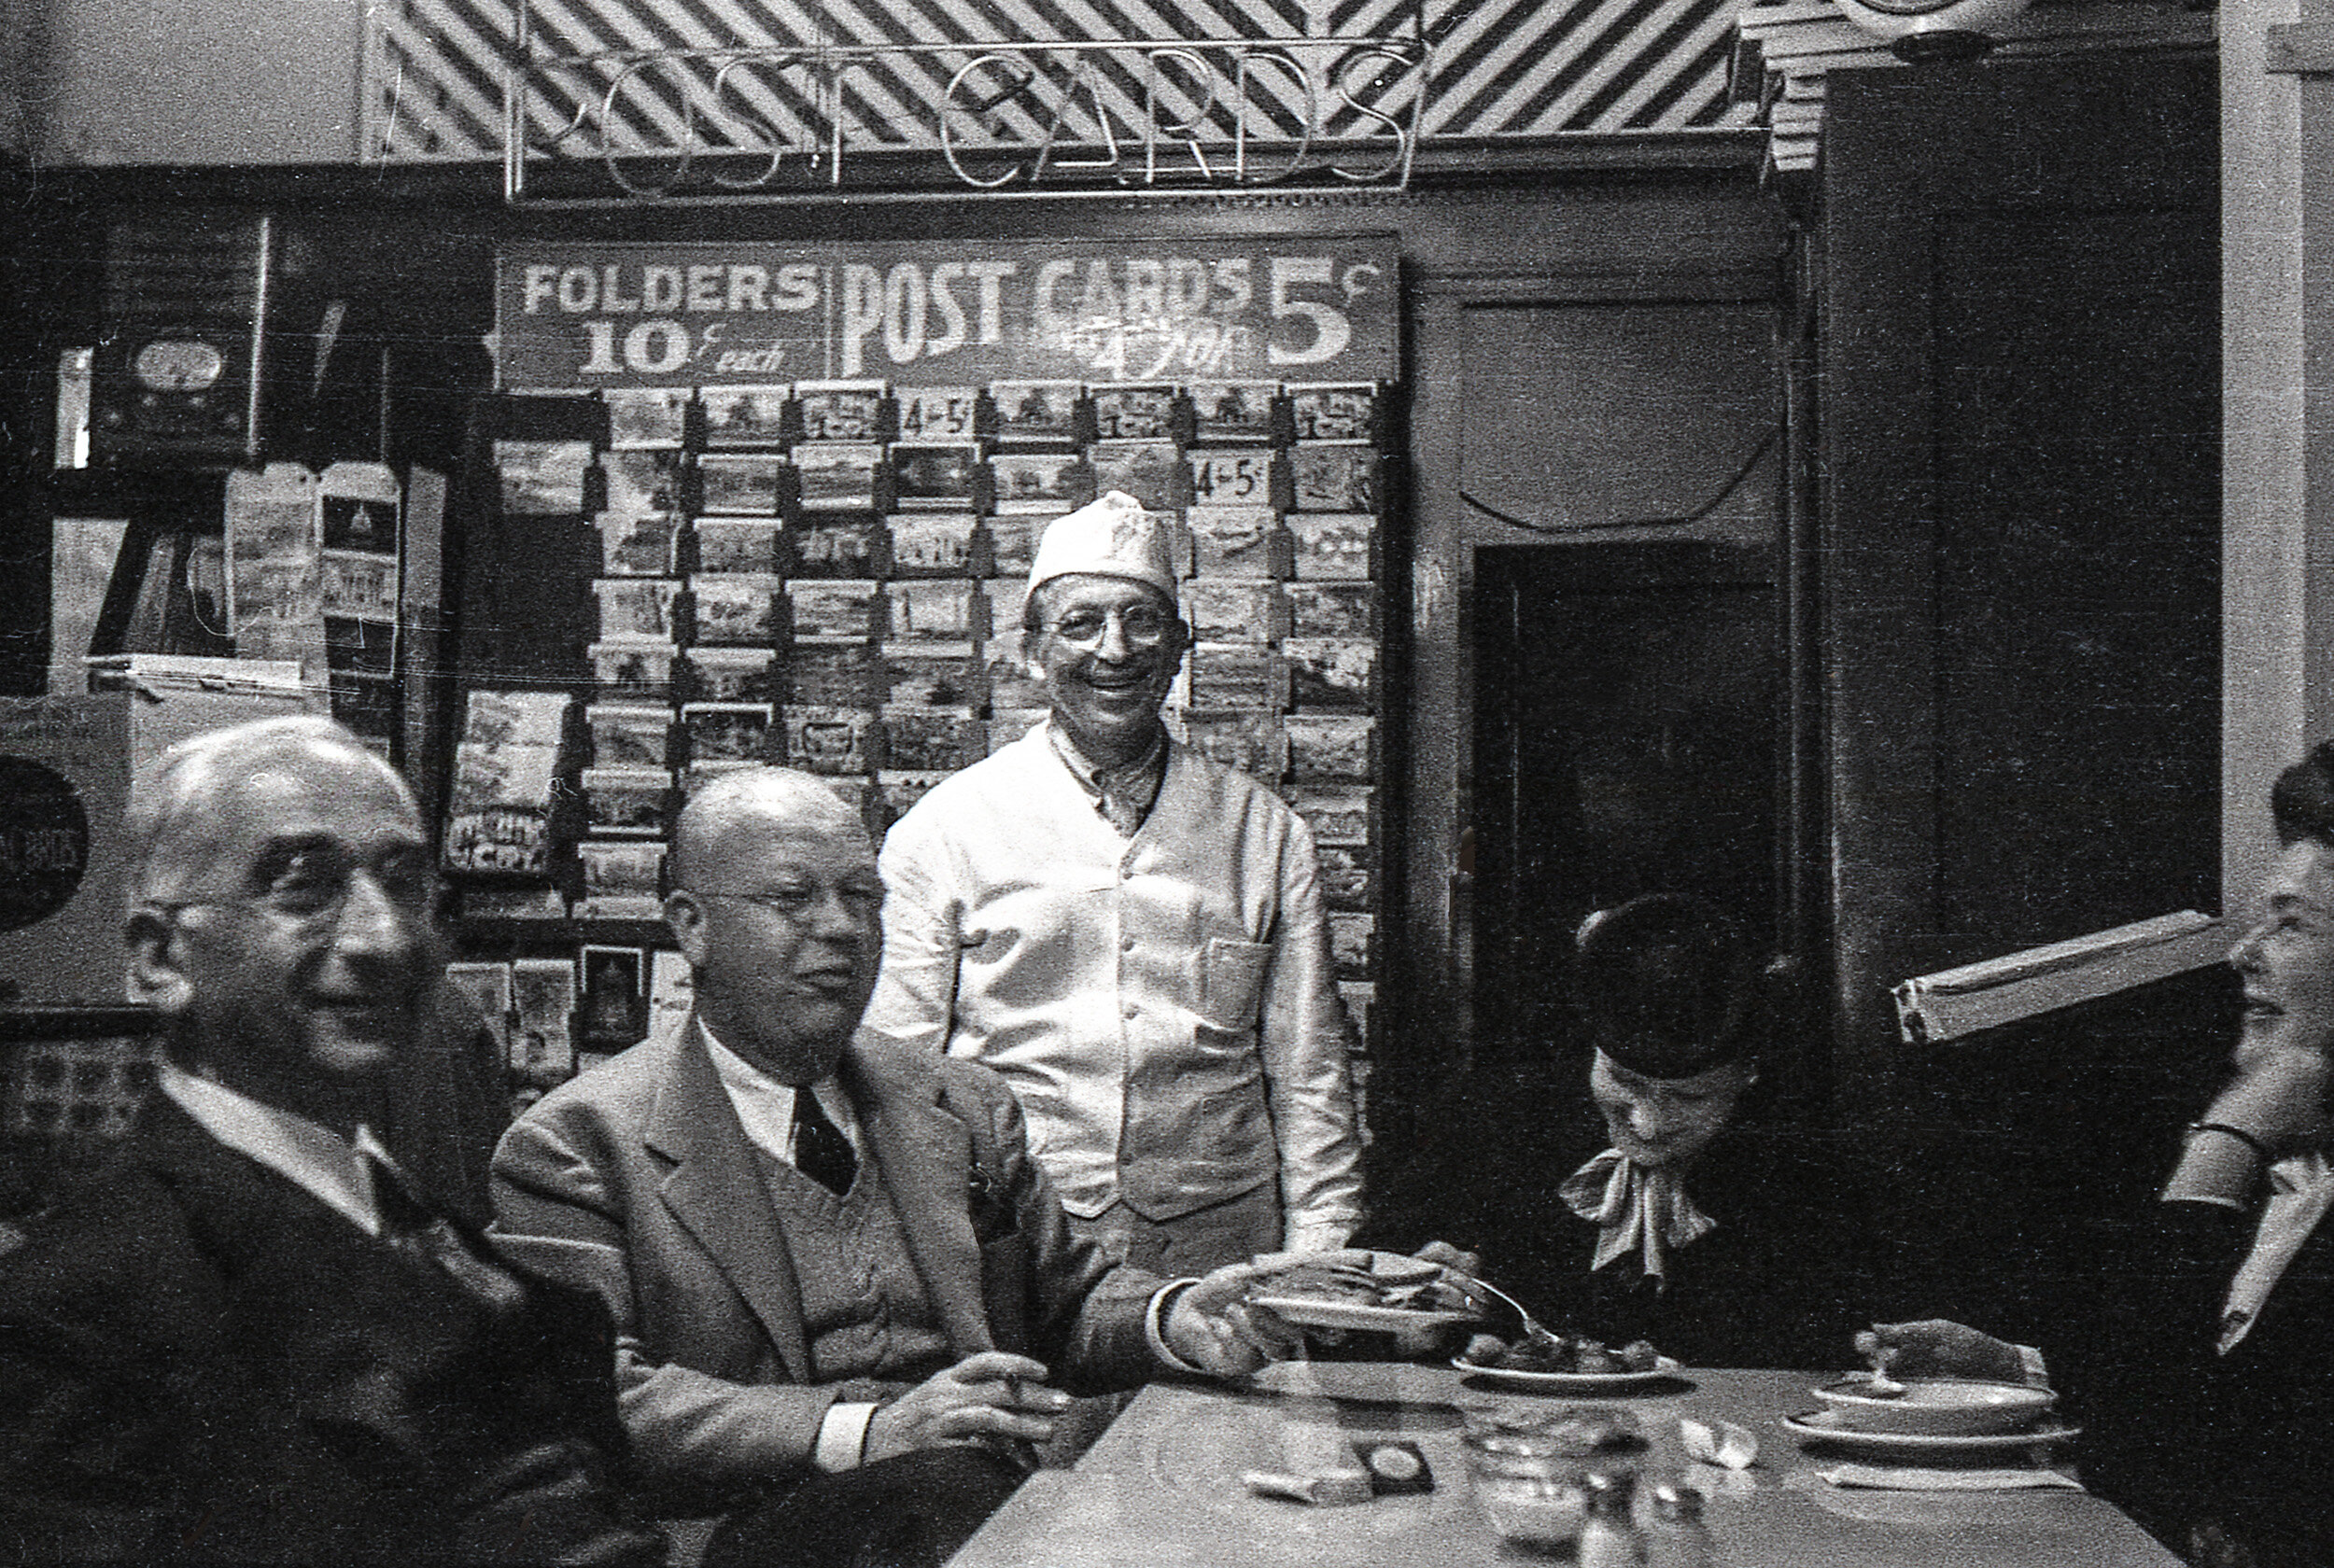 NYC Deli during WWII